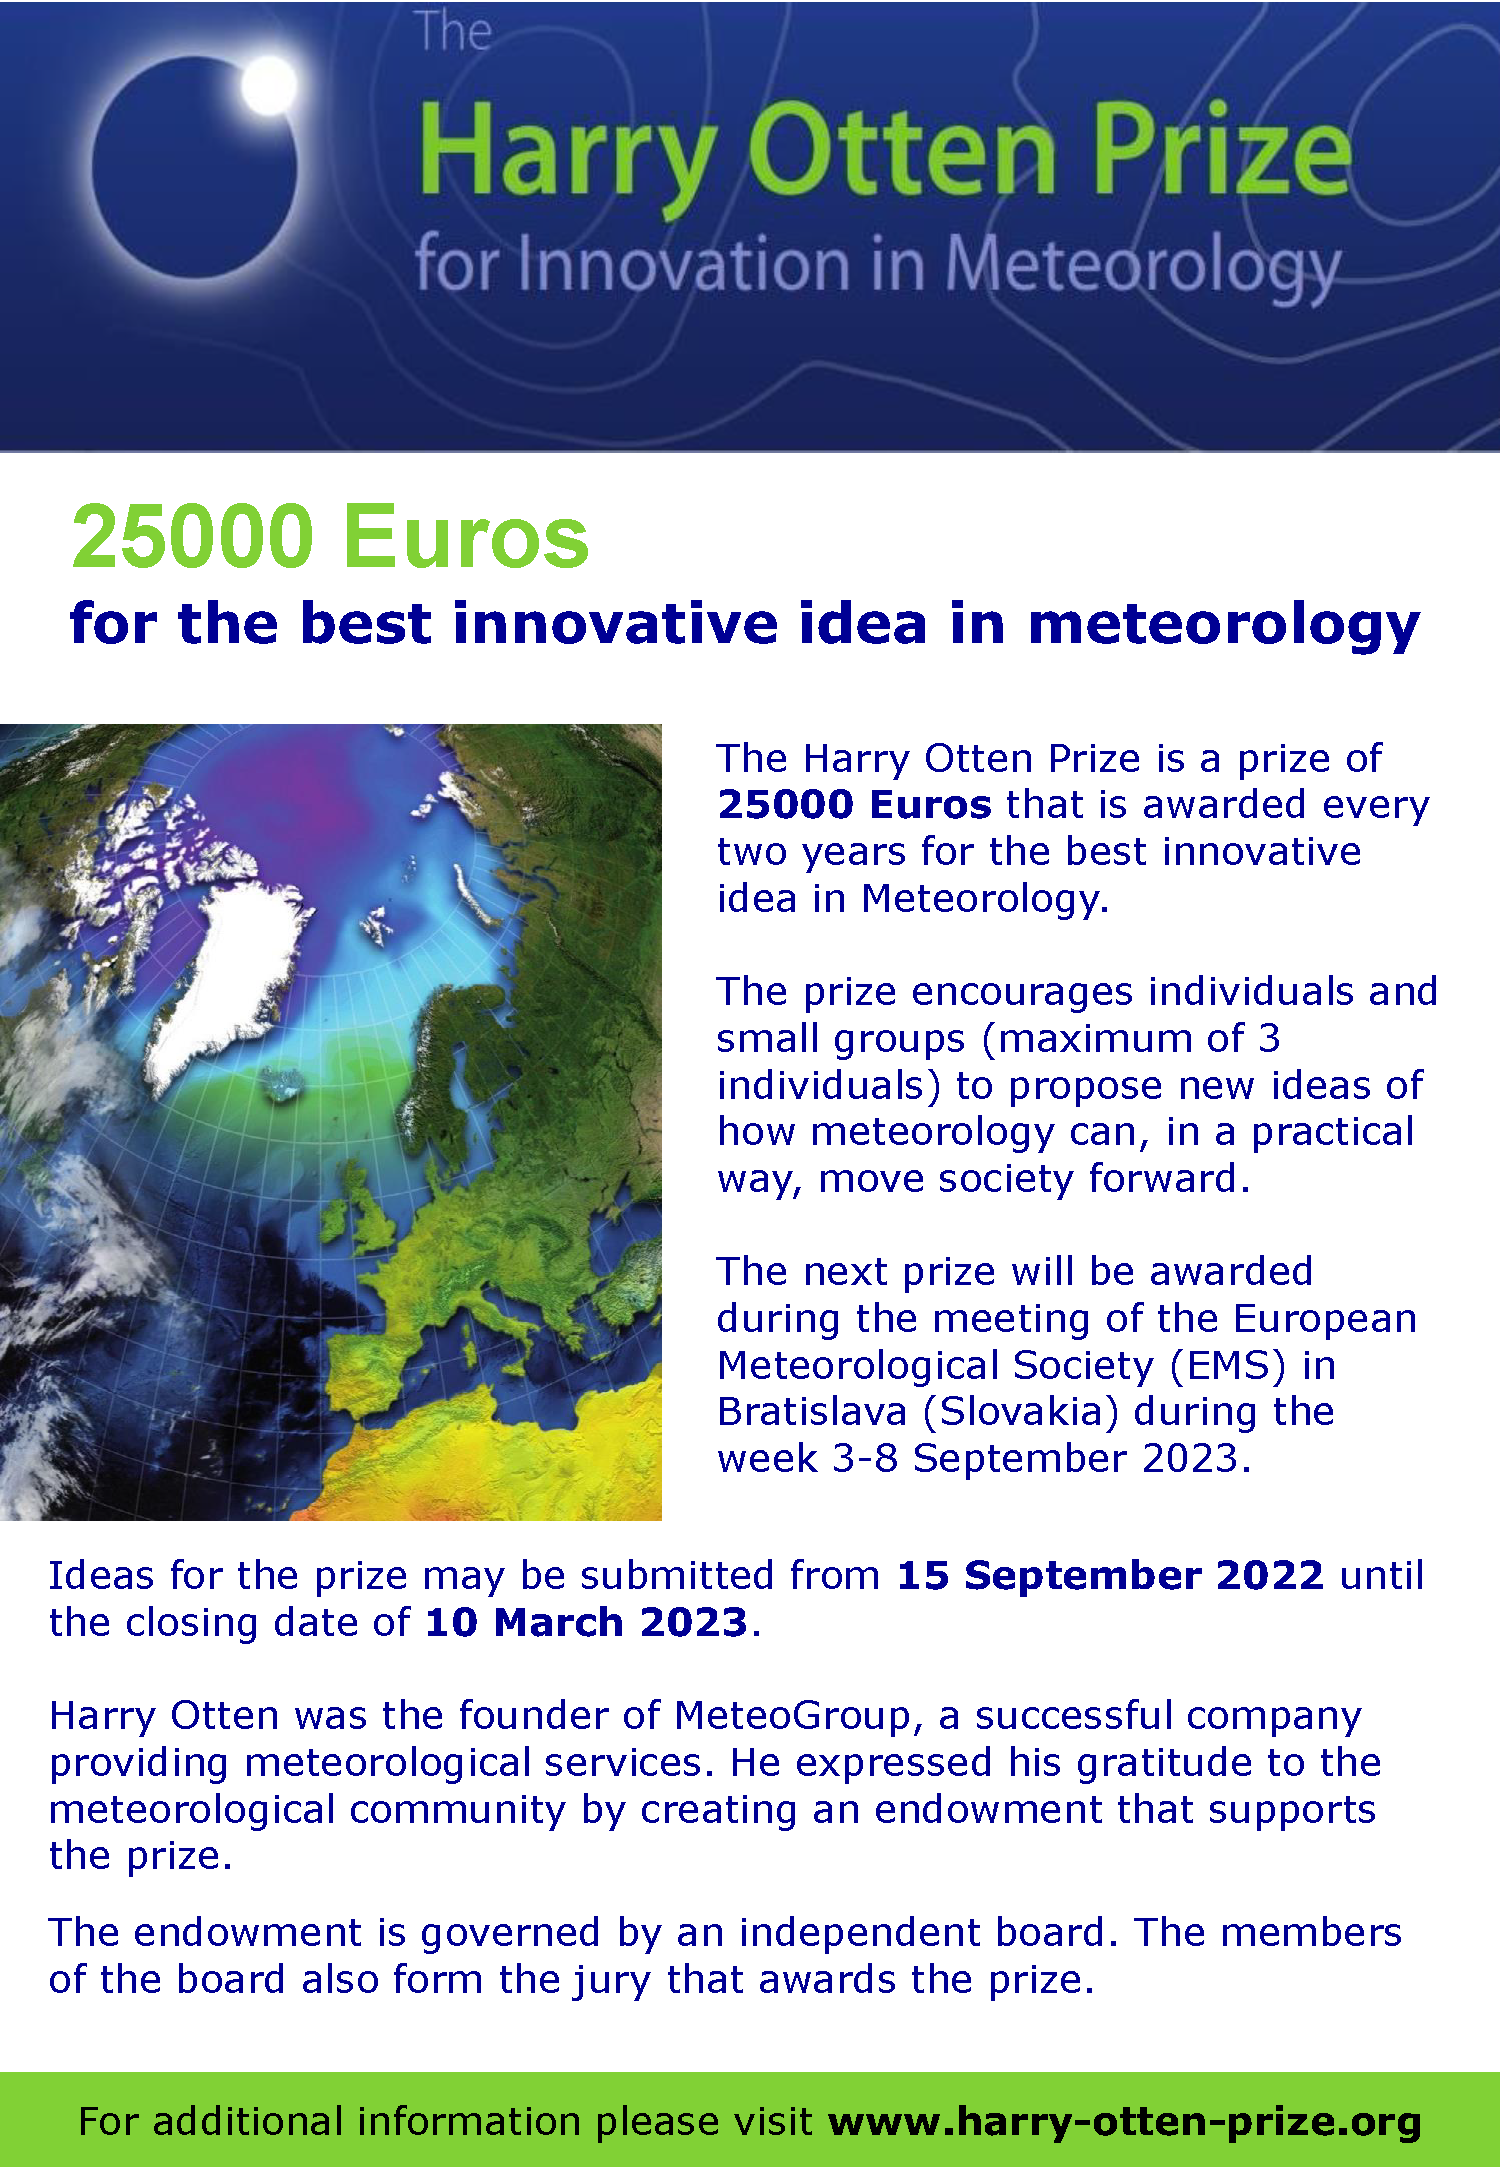 The Harry Otten Prize is a prize of 25000 Euros that is awarded every two years for the best innovative idea in Meteorology. The prize encourages individuals and small groups (maximum of 3 individuals) to propose new ideas of how meteorology can, in a practical way, move society forward. The